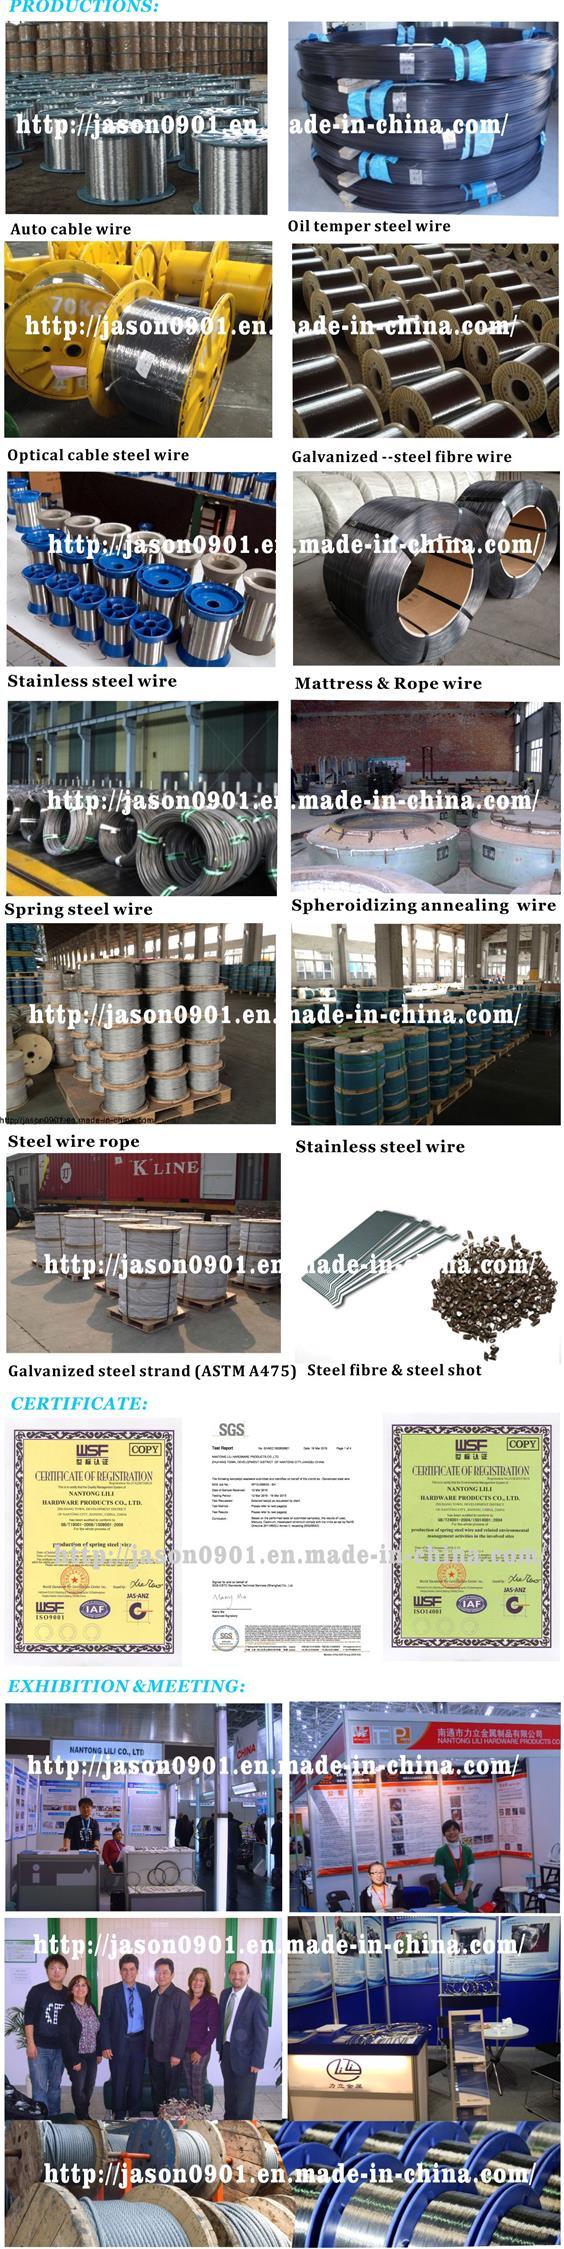 Stainless Steel Wire Rope, Stainless Wire, Stainless Wire Rope, Steel Wire, Wire Rope